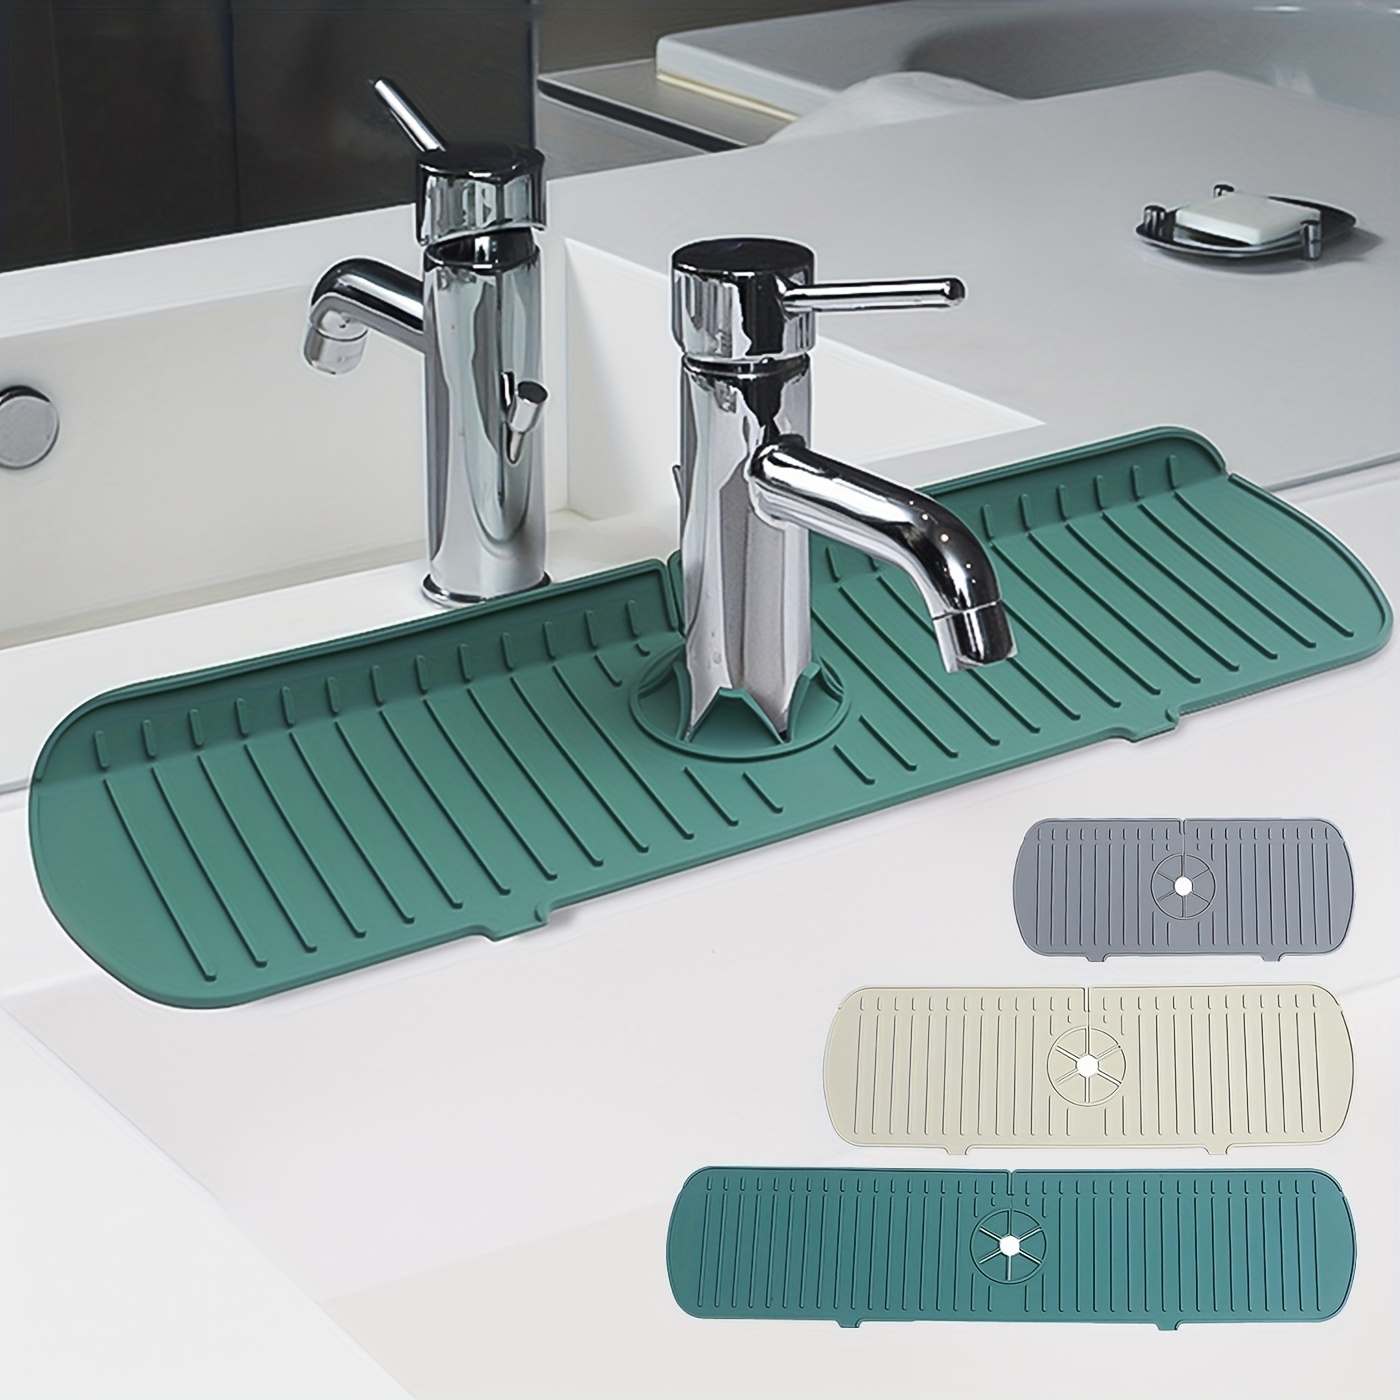 Sink Topper, Foldable Bathroom Sink Cover for Counter Space. A Perfect  Makeup mat for Vanity and Bathroom Must Haves. Great as an RV Sink Cover, Bathroom  Sink Organizer and Makeup Brush Cleaner